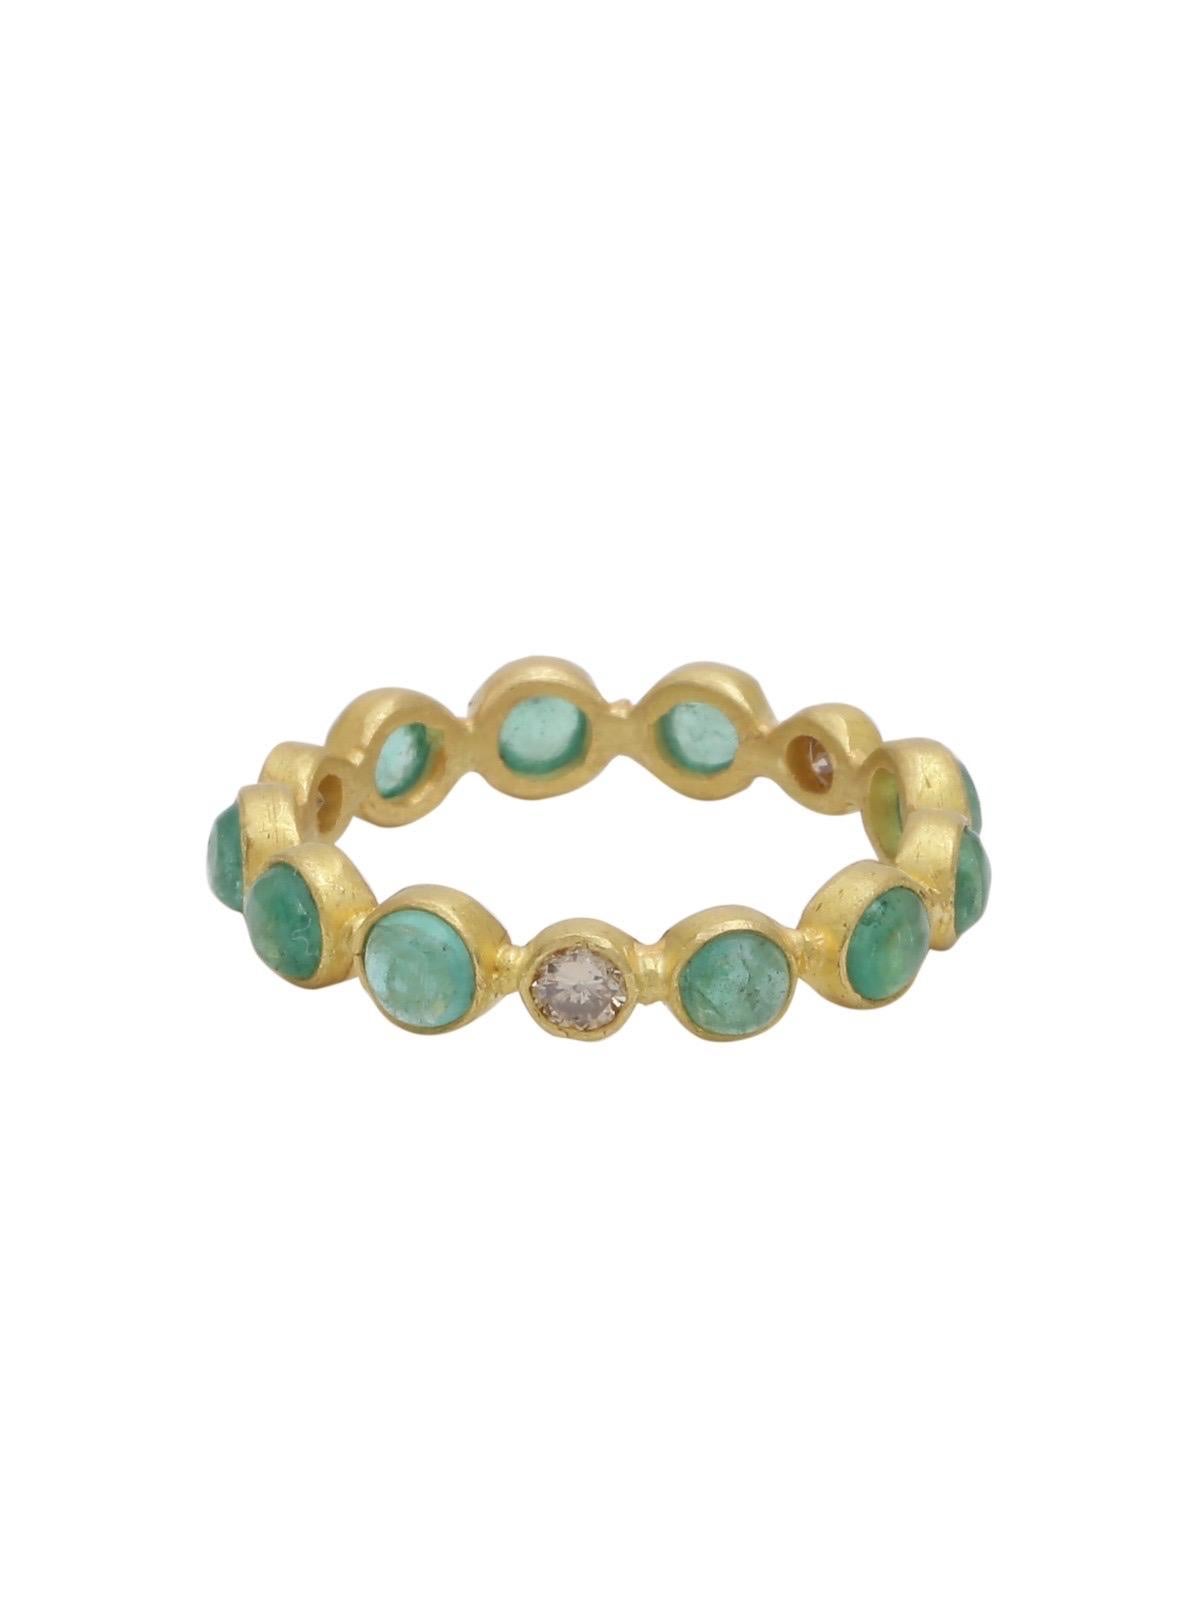 Round Cut Emerald Cabochon and Diamond Eternity Band Handcrafted in 22K Gold